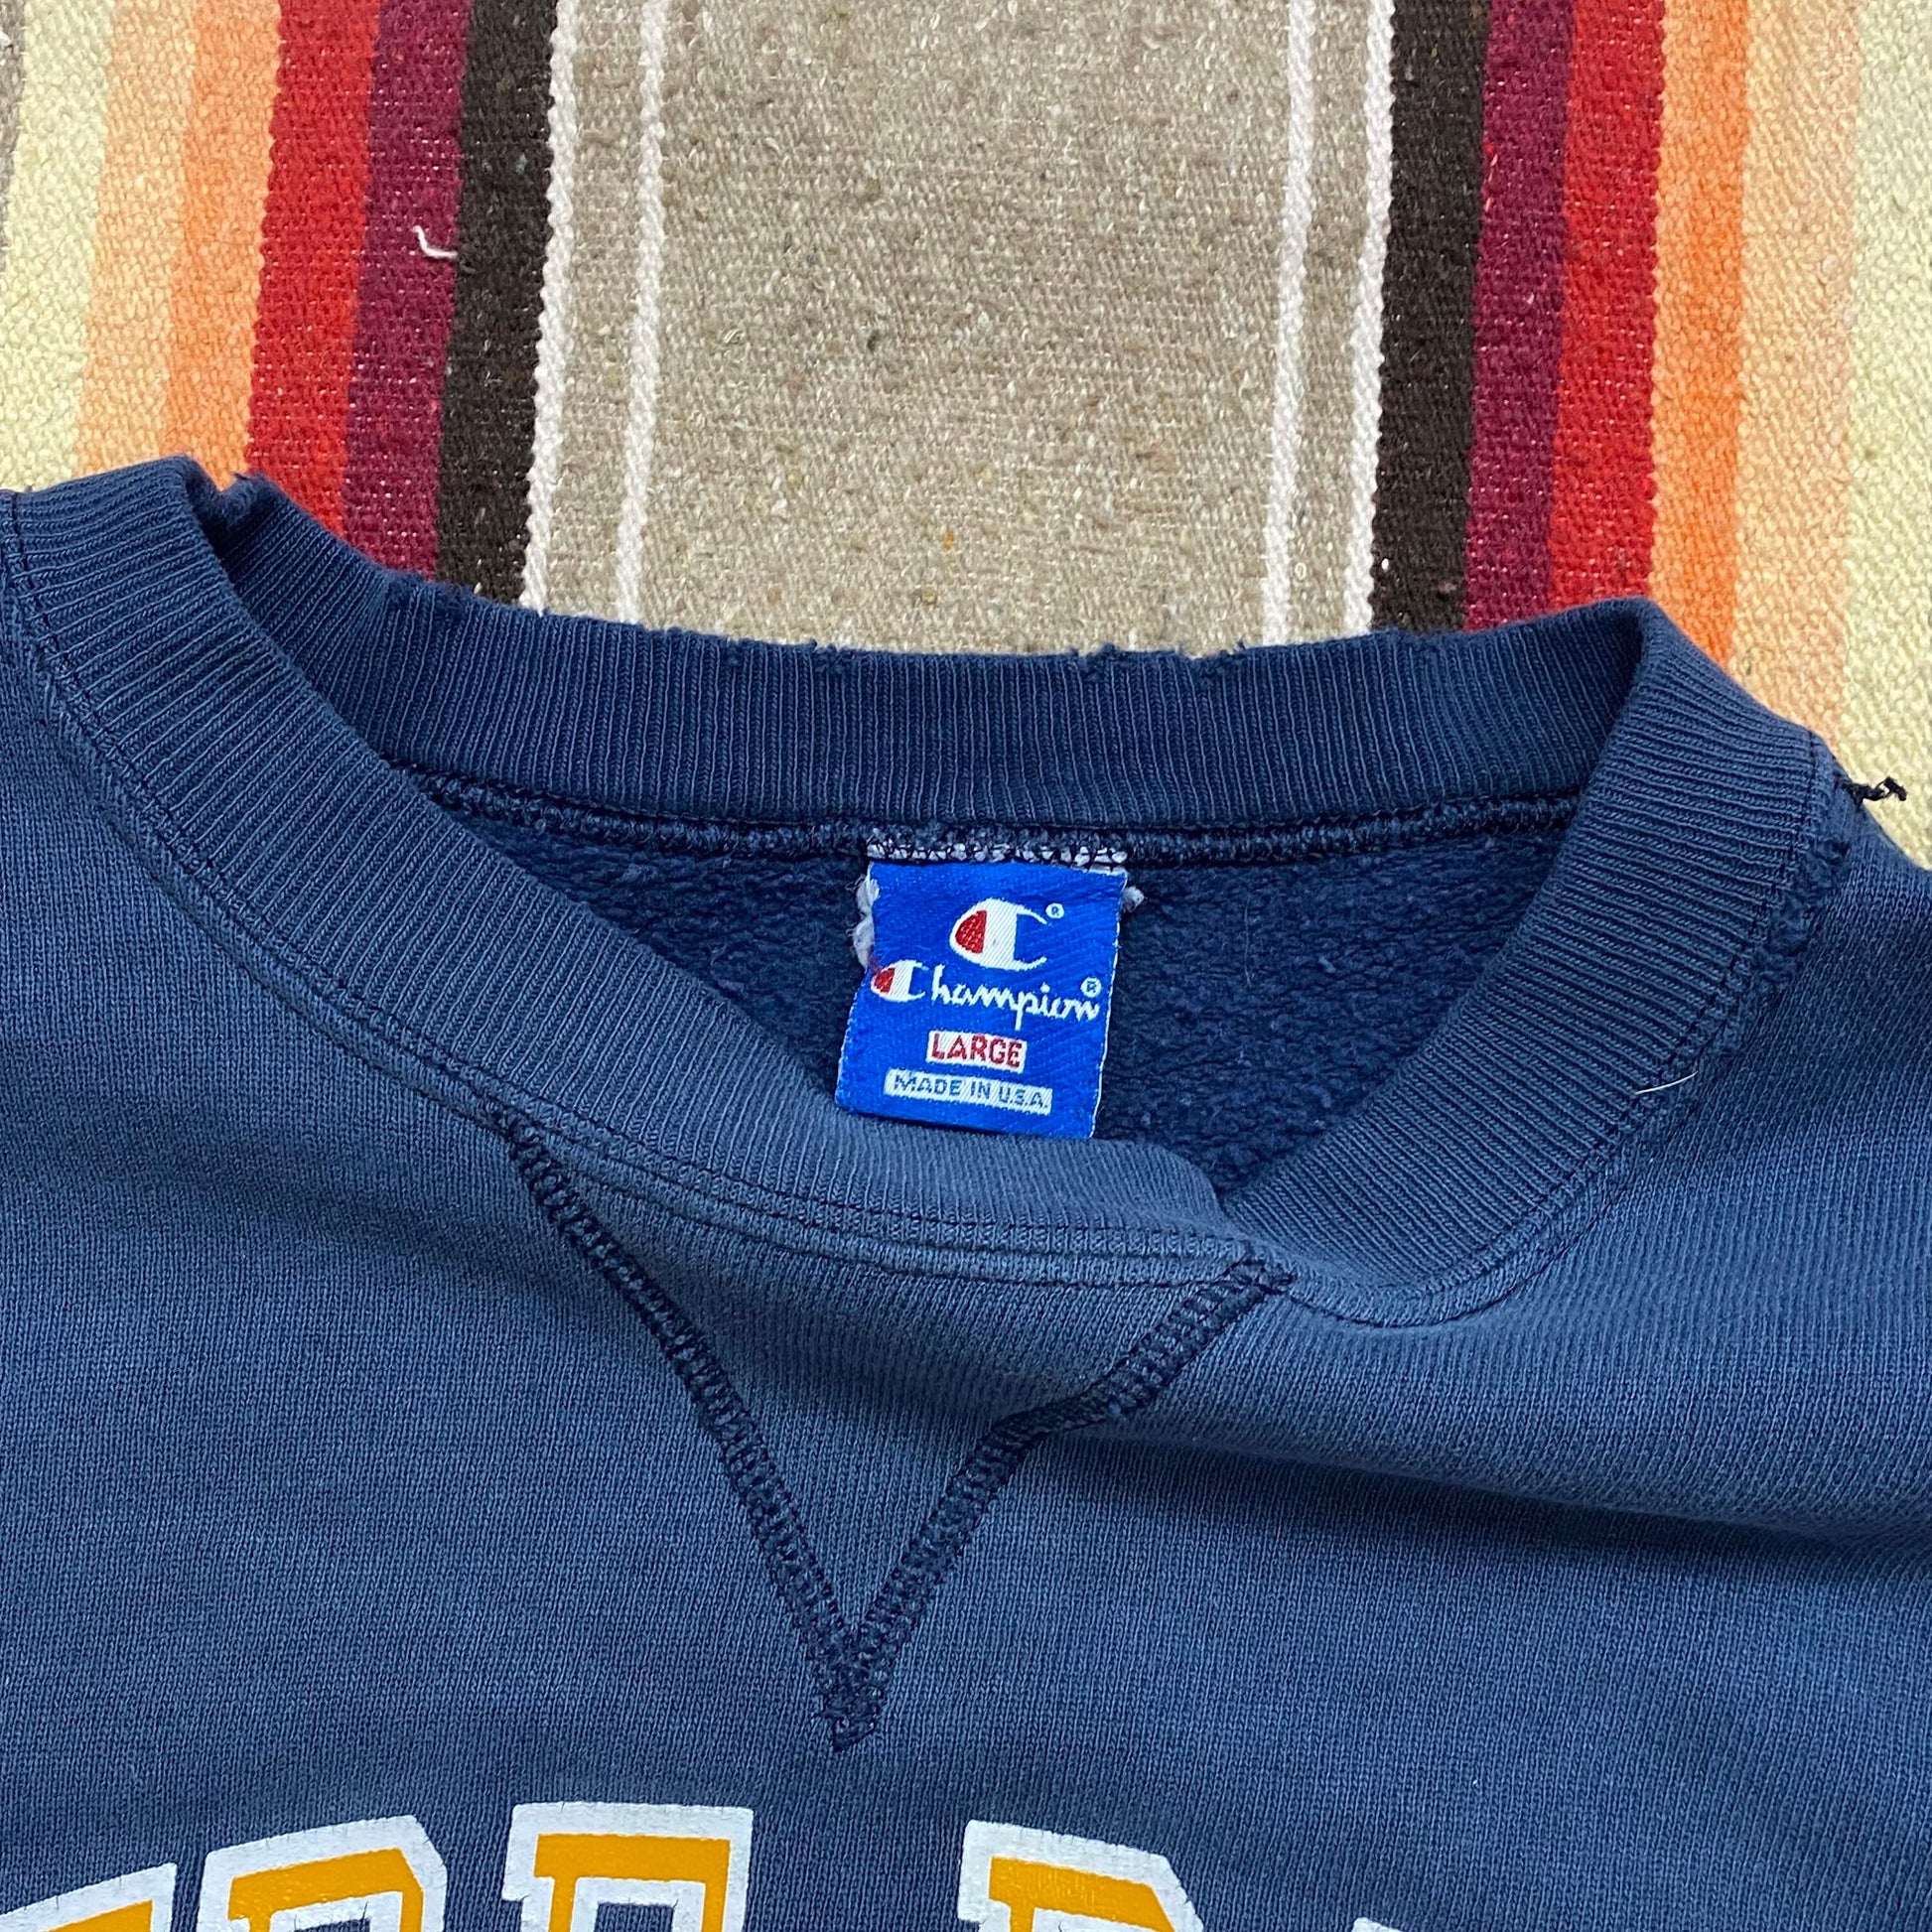 1980s Champion Notre Dame Sweatshirt Made in USA Size L